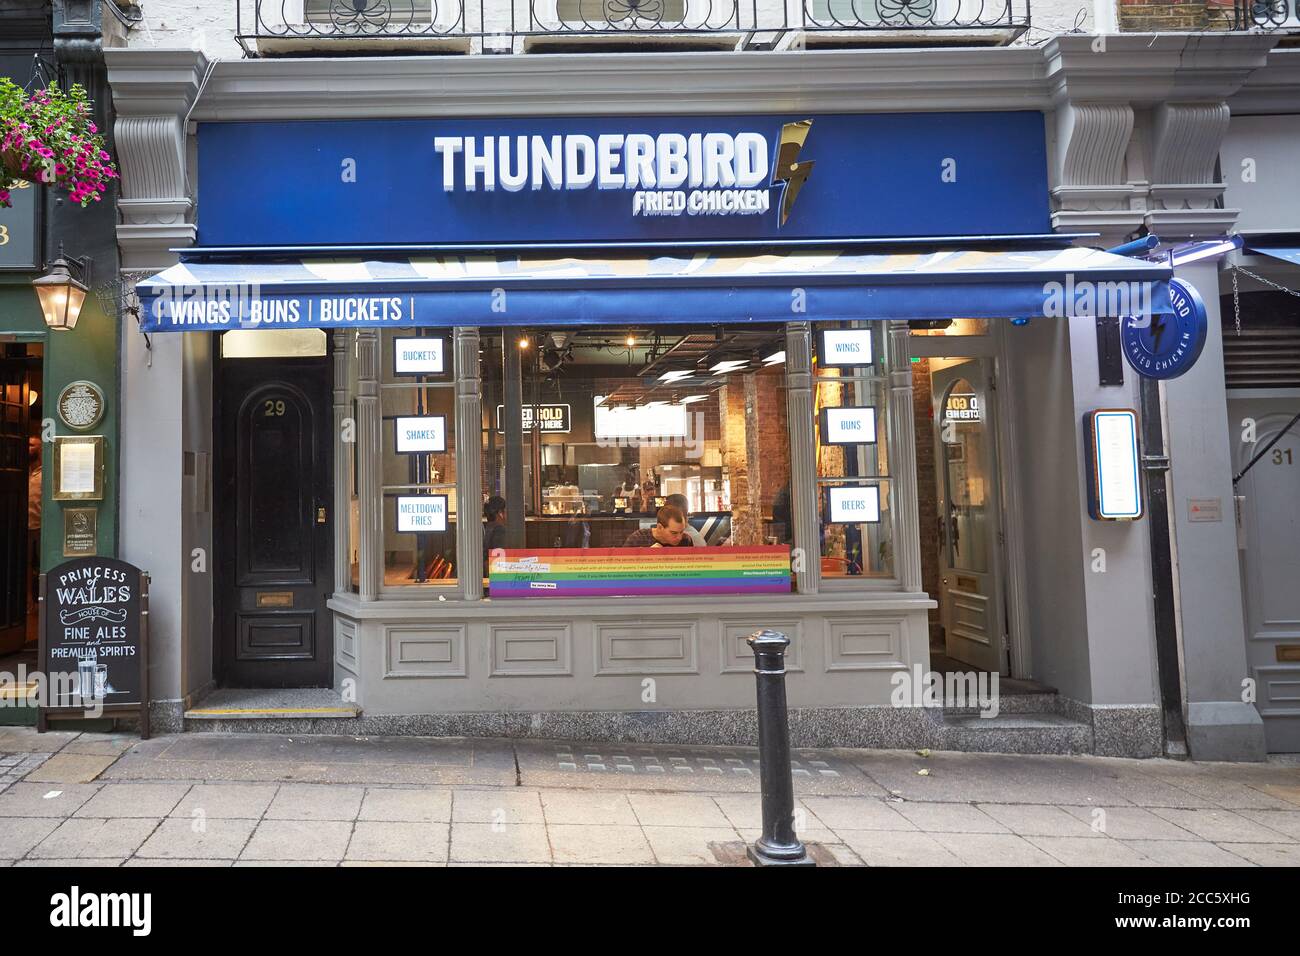 A branch of Thunderbird Fried Chicken in Villiers Street near Charing Cross. Stock Photo